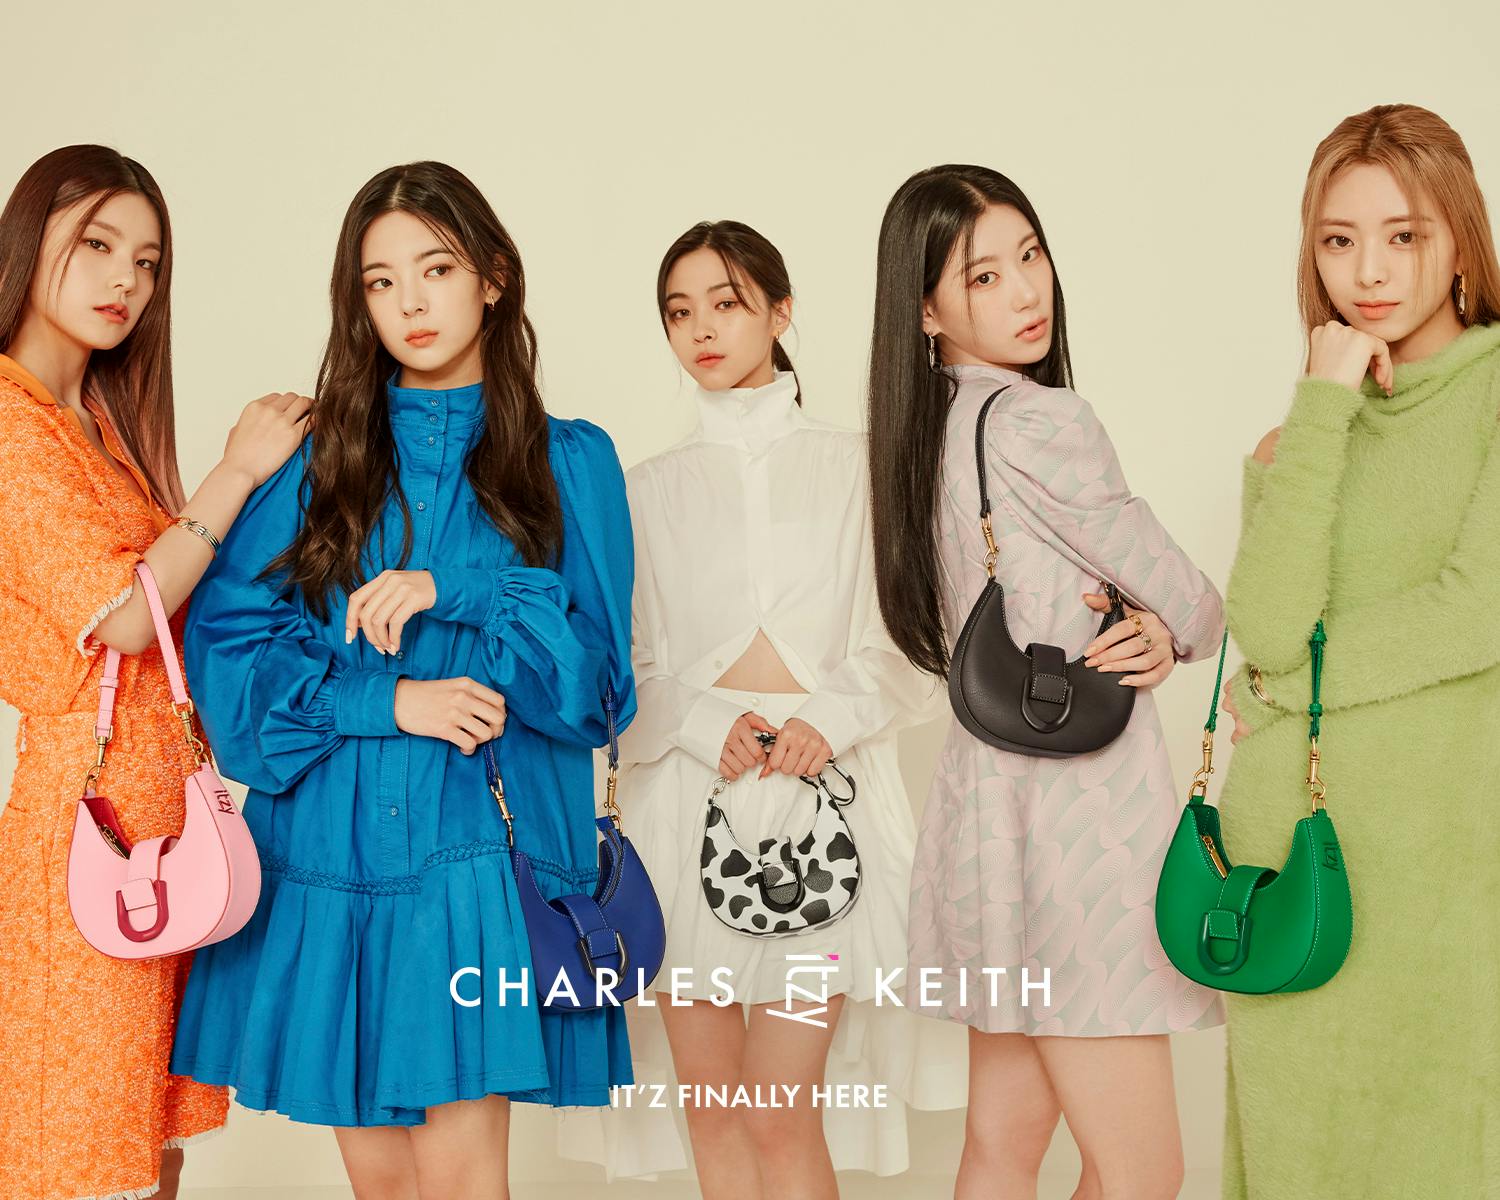 ITZY Shares Thoughts About Comeback With New Mini Album “CHECKMATE